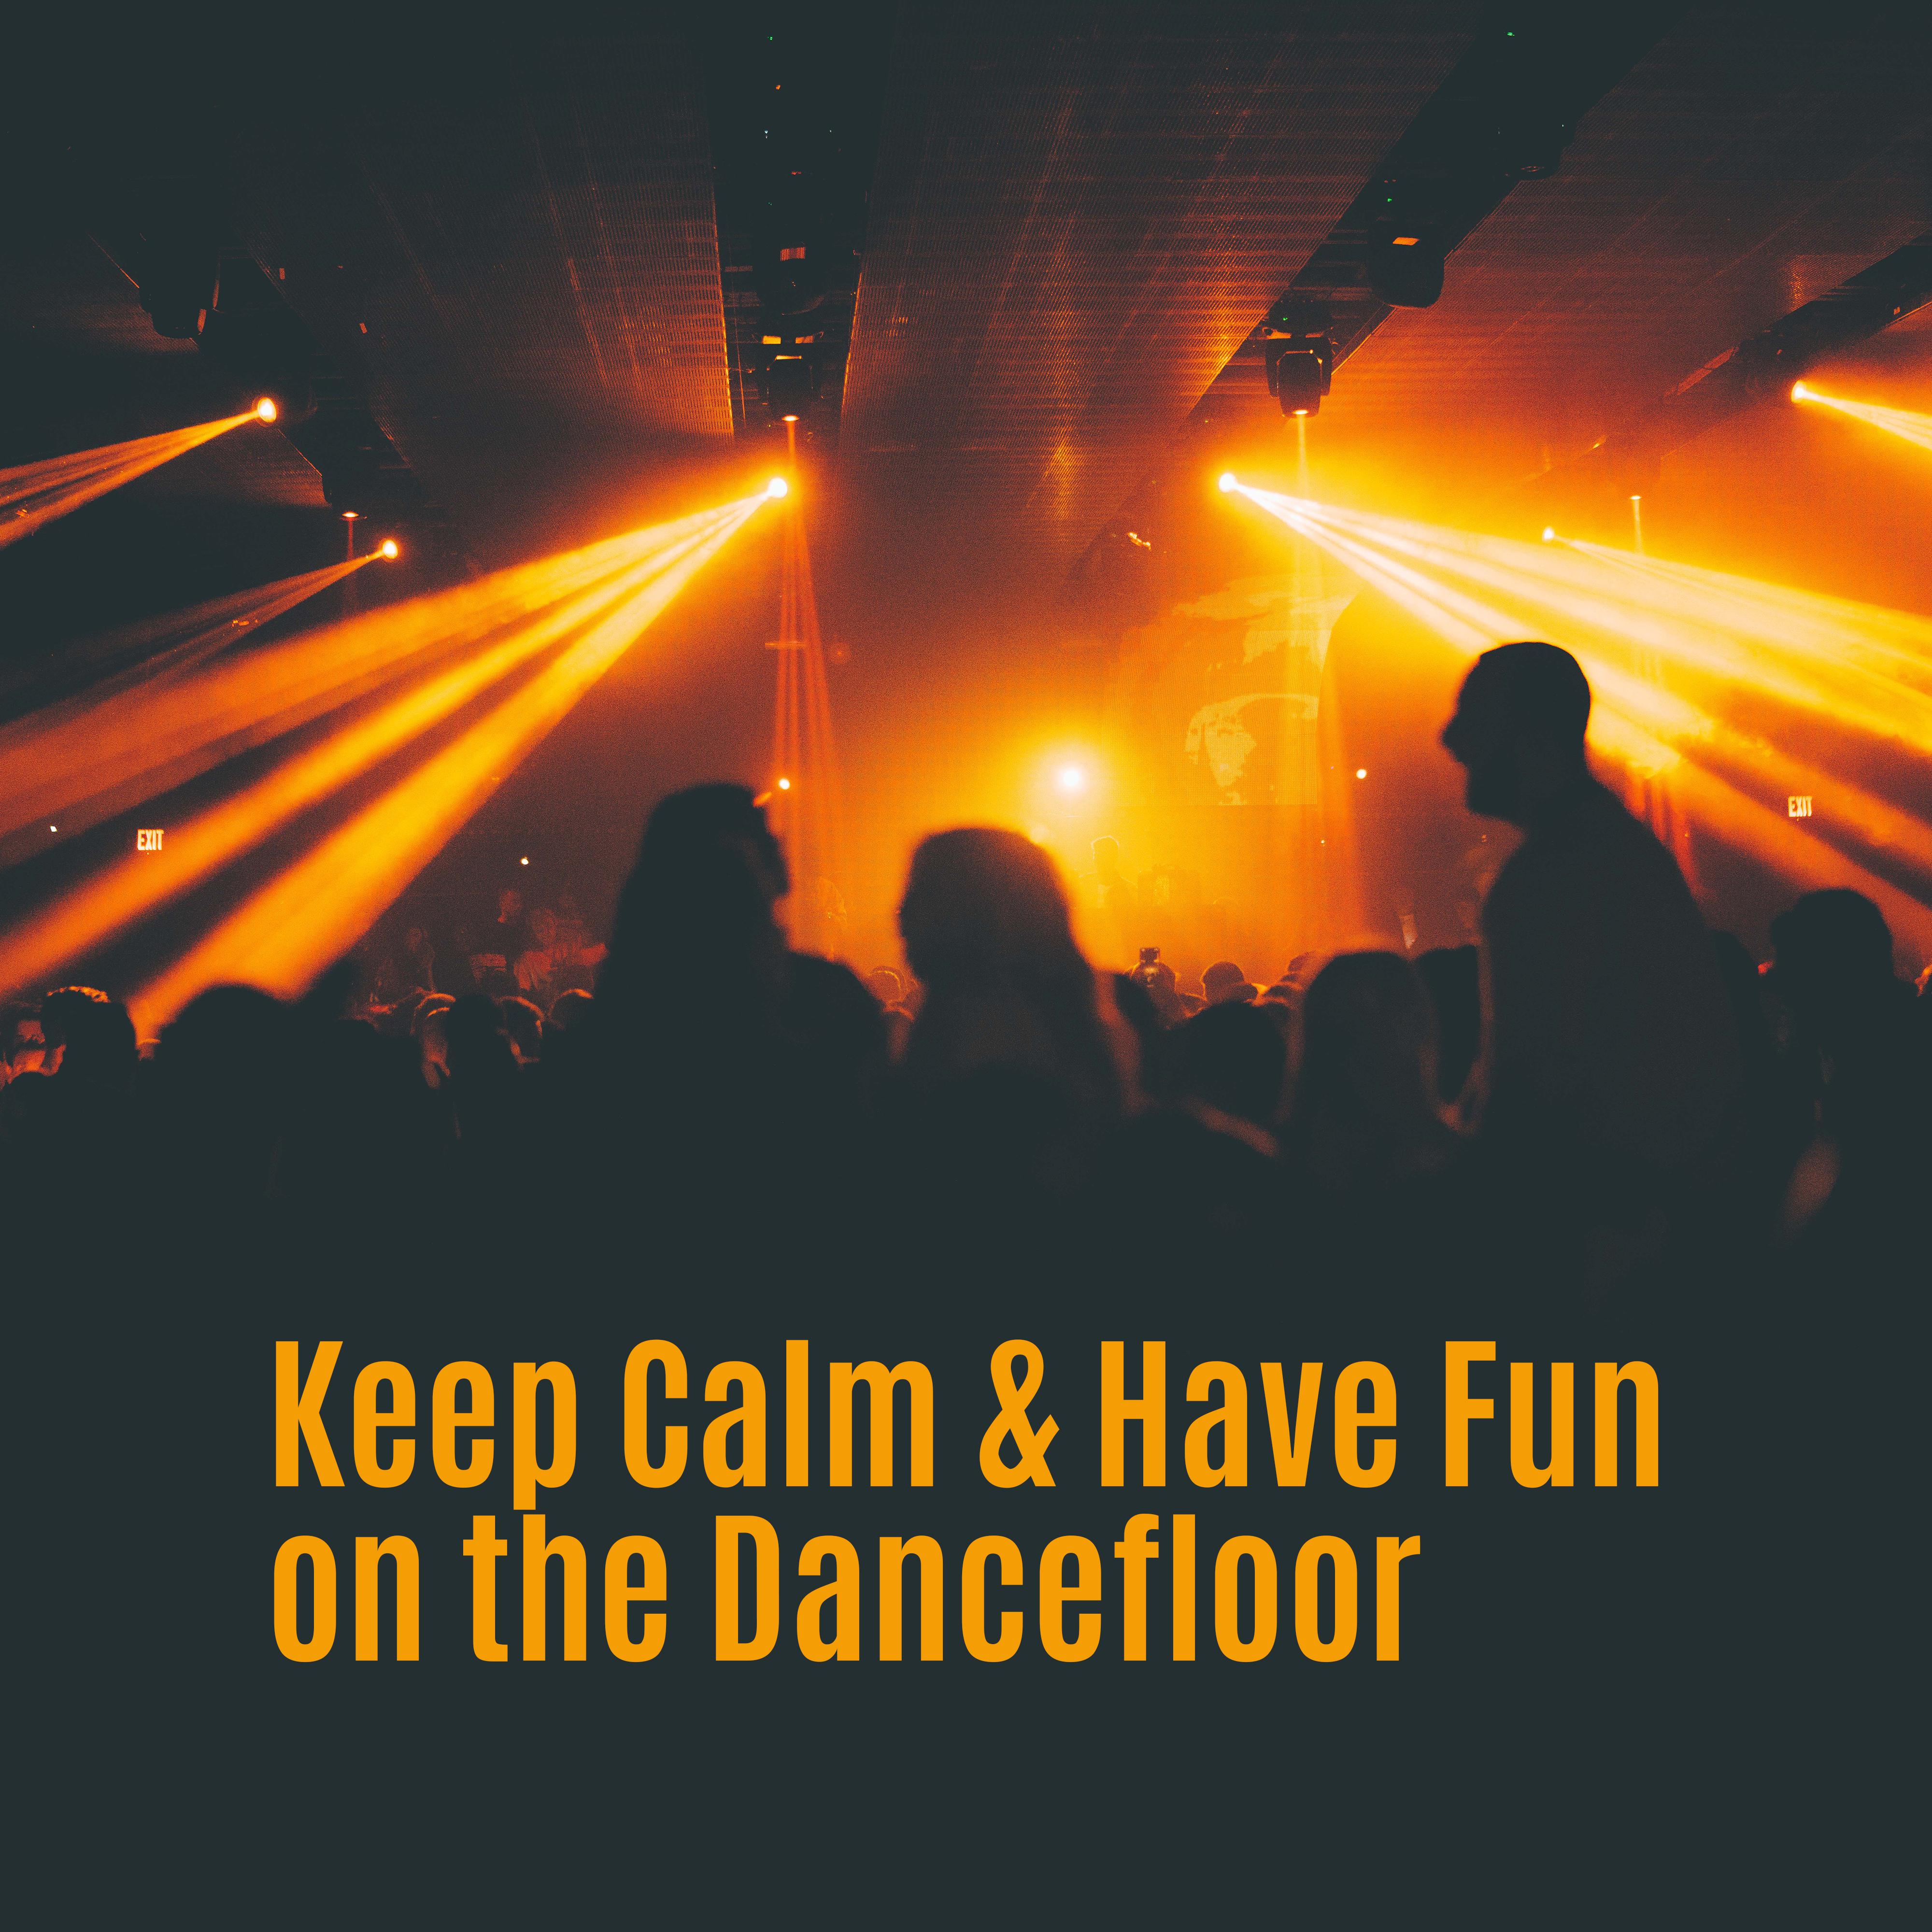 Keep Calm & Have Fun on the Dancefloor: 2019 EDM Chillout Dance Music Mix, Ultimate Party Set, Dancing All Night Long in the Club or at Home